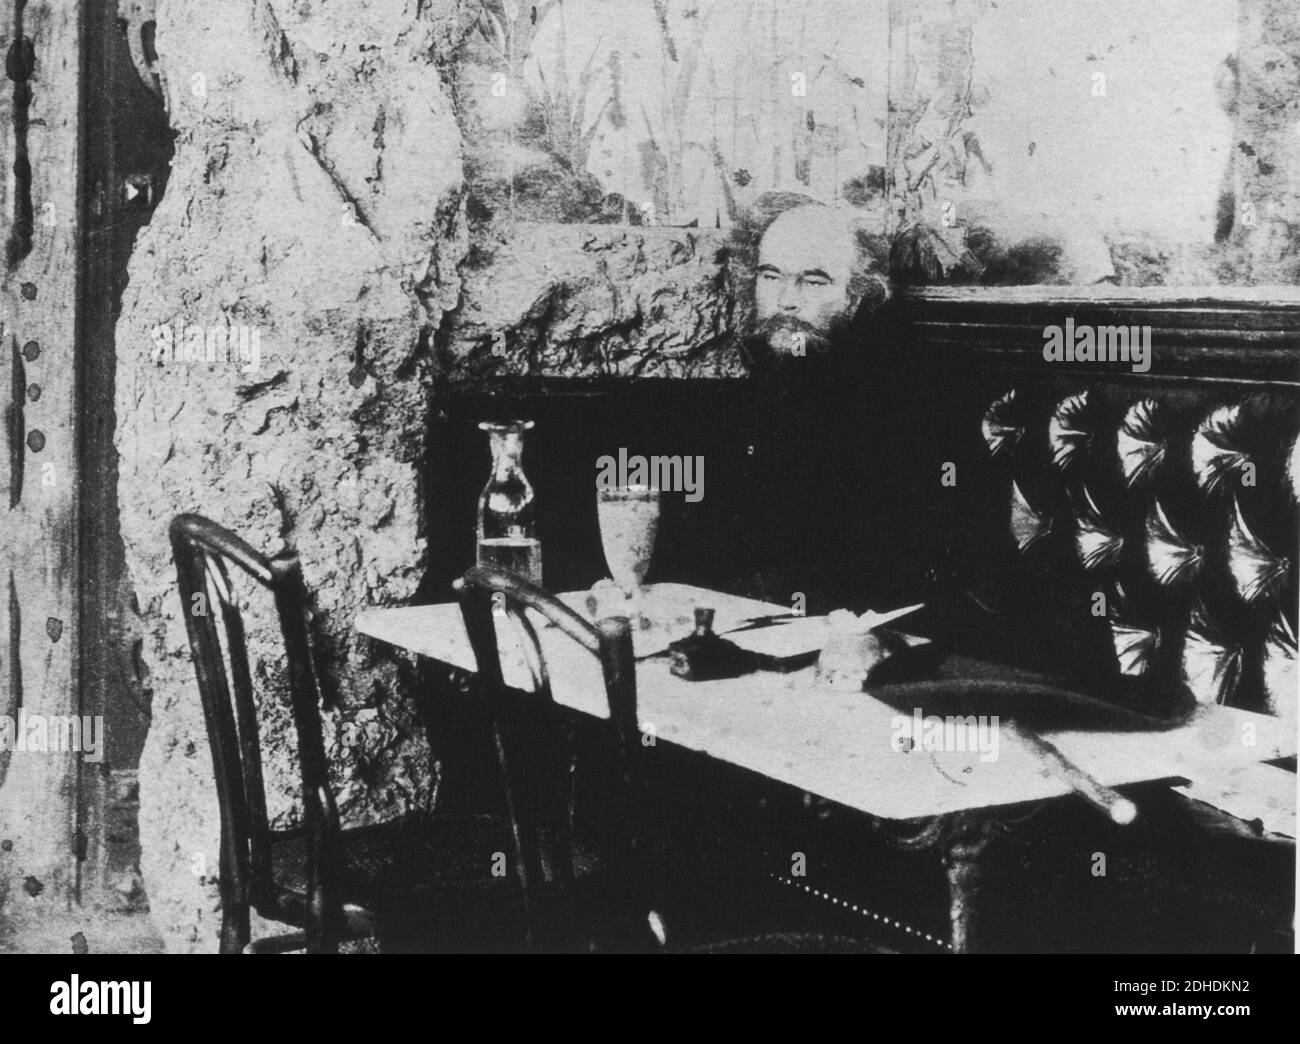 The french poet PAUL  VERLAINE (  1844 -   1896 ) in an absinthe stupor in the Café Procope , Paris . Beside the inkwell stands a glass of his ' humble ephemeral absinthe ' - ASSENZIO - ubriaco - drunk  - POETA - POESIA - POETRY - LETTERATO - LETTERATURA - LITERATURE - Arthur RIMBAUD - gay - homosexual - homosexuality - omosessuale - omosessualità - stempiato - stempiatura - timming at temple  - barba - beard - portrait - ritratto  - SIMBOLISMO - SIMBOLISM - Boheme  - bohemien - bar - caffè - café  ----  Archivio GBB Stock Photo